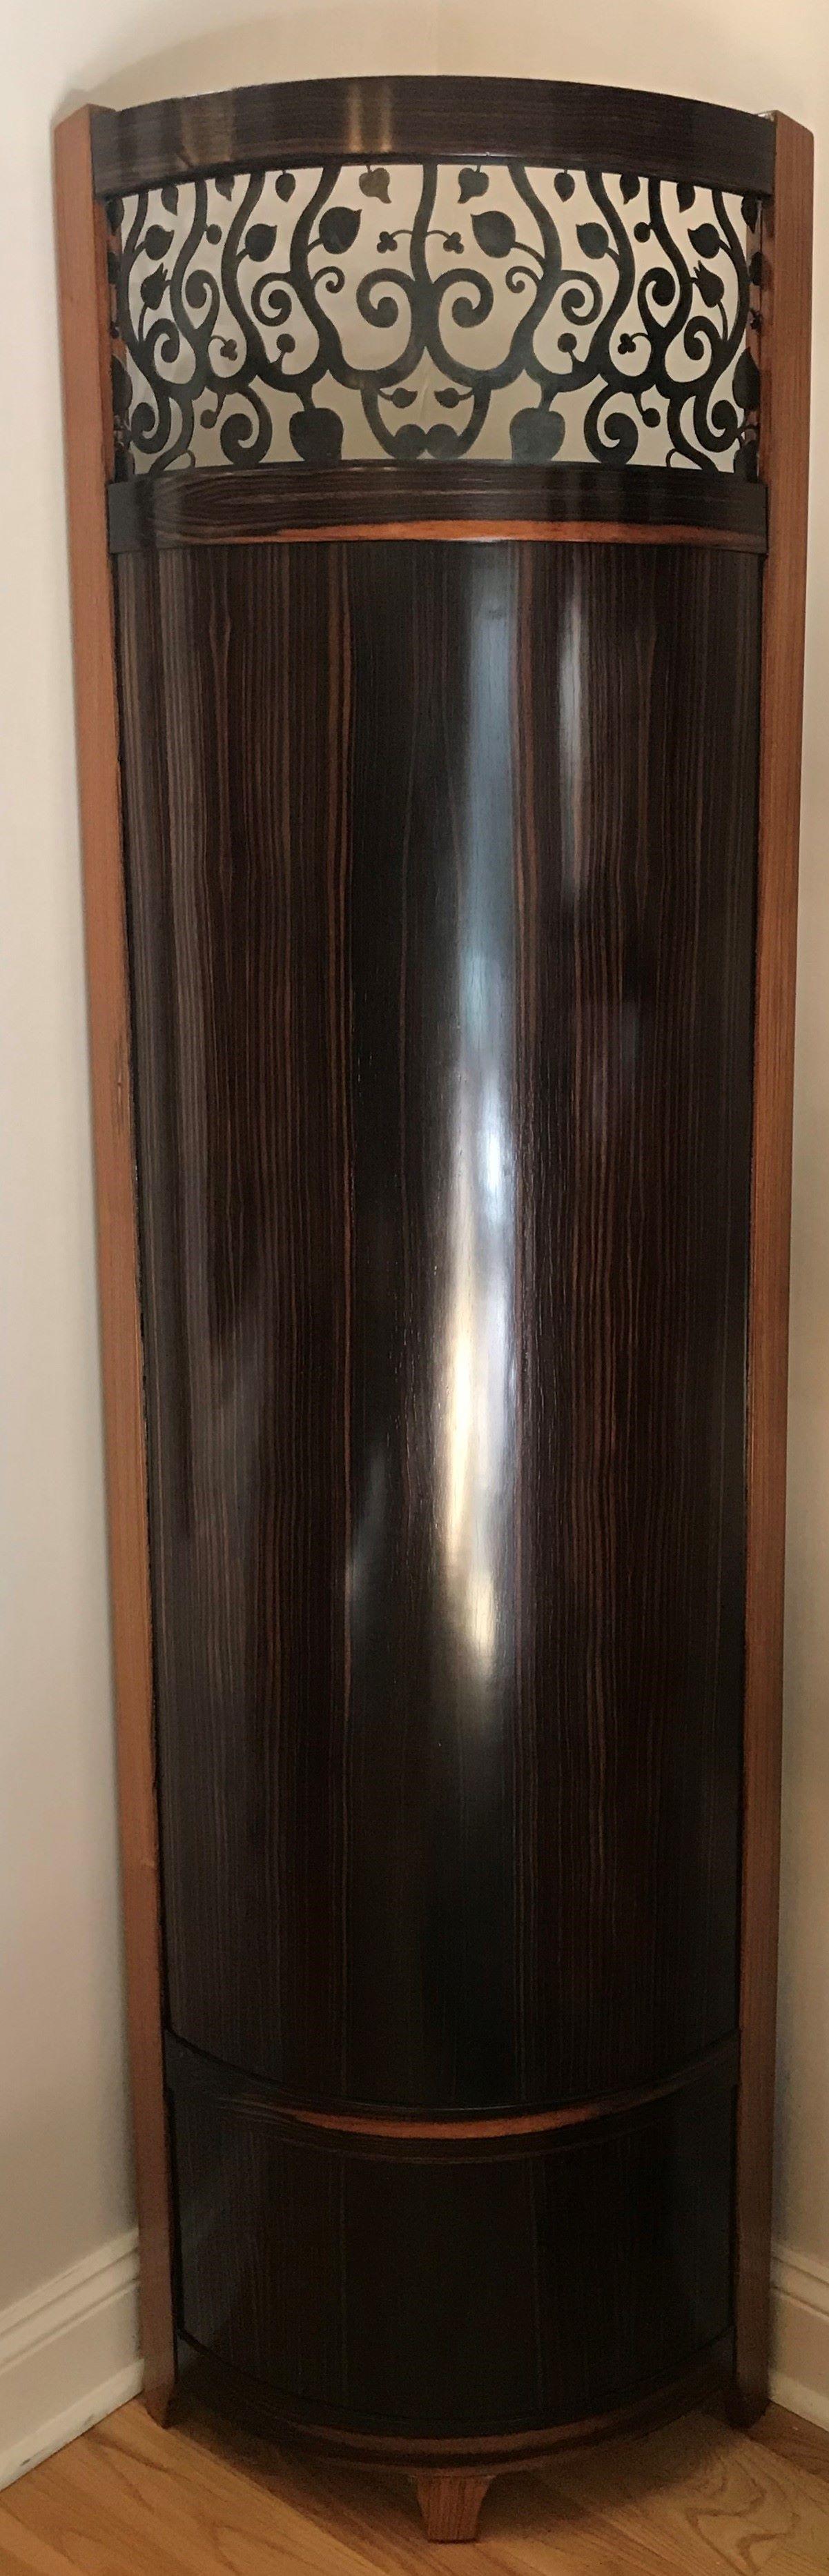 Screen / Room Divider Mixed Media with Exotic Wood, Steel and Tapestry In Excellent Condition For Sale In Wilton, CT